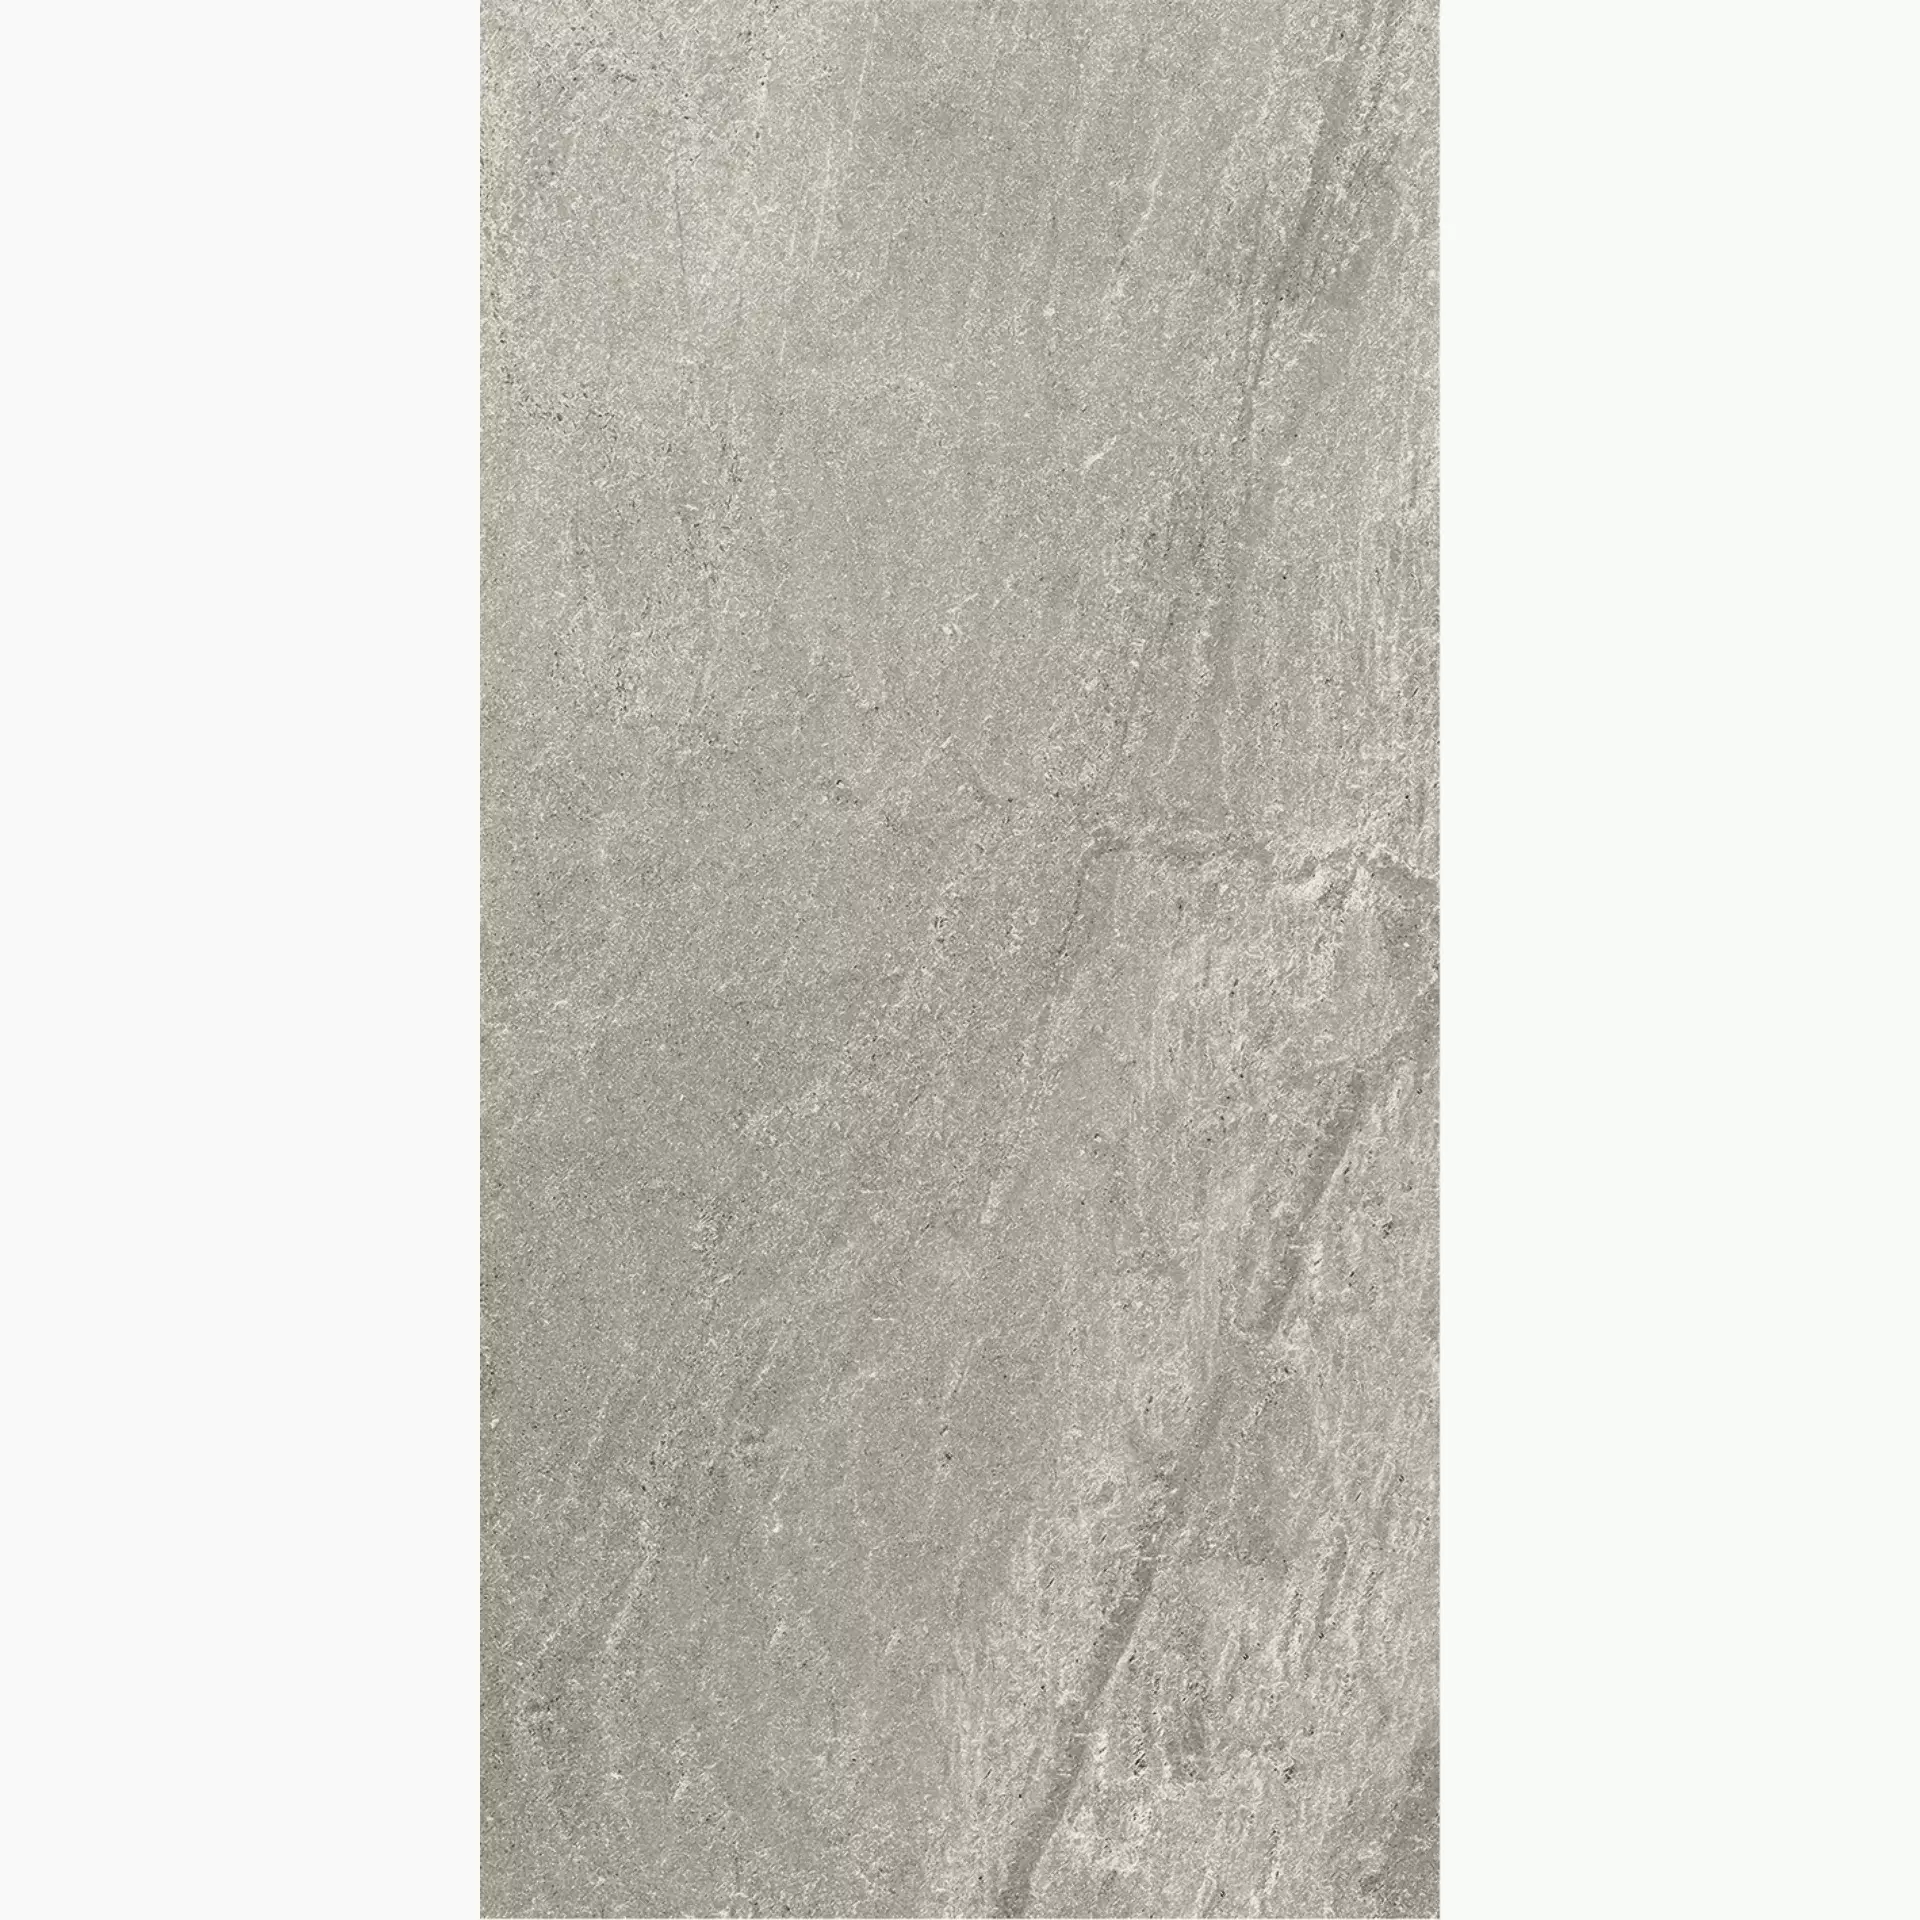 Novabell All Black Grigio Naturale ALK12RT 60x120cm rectified 9mm